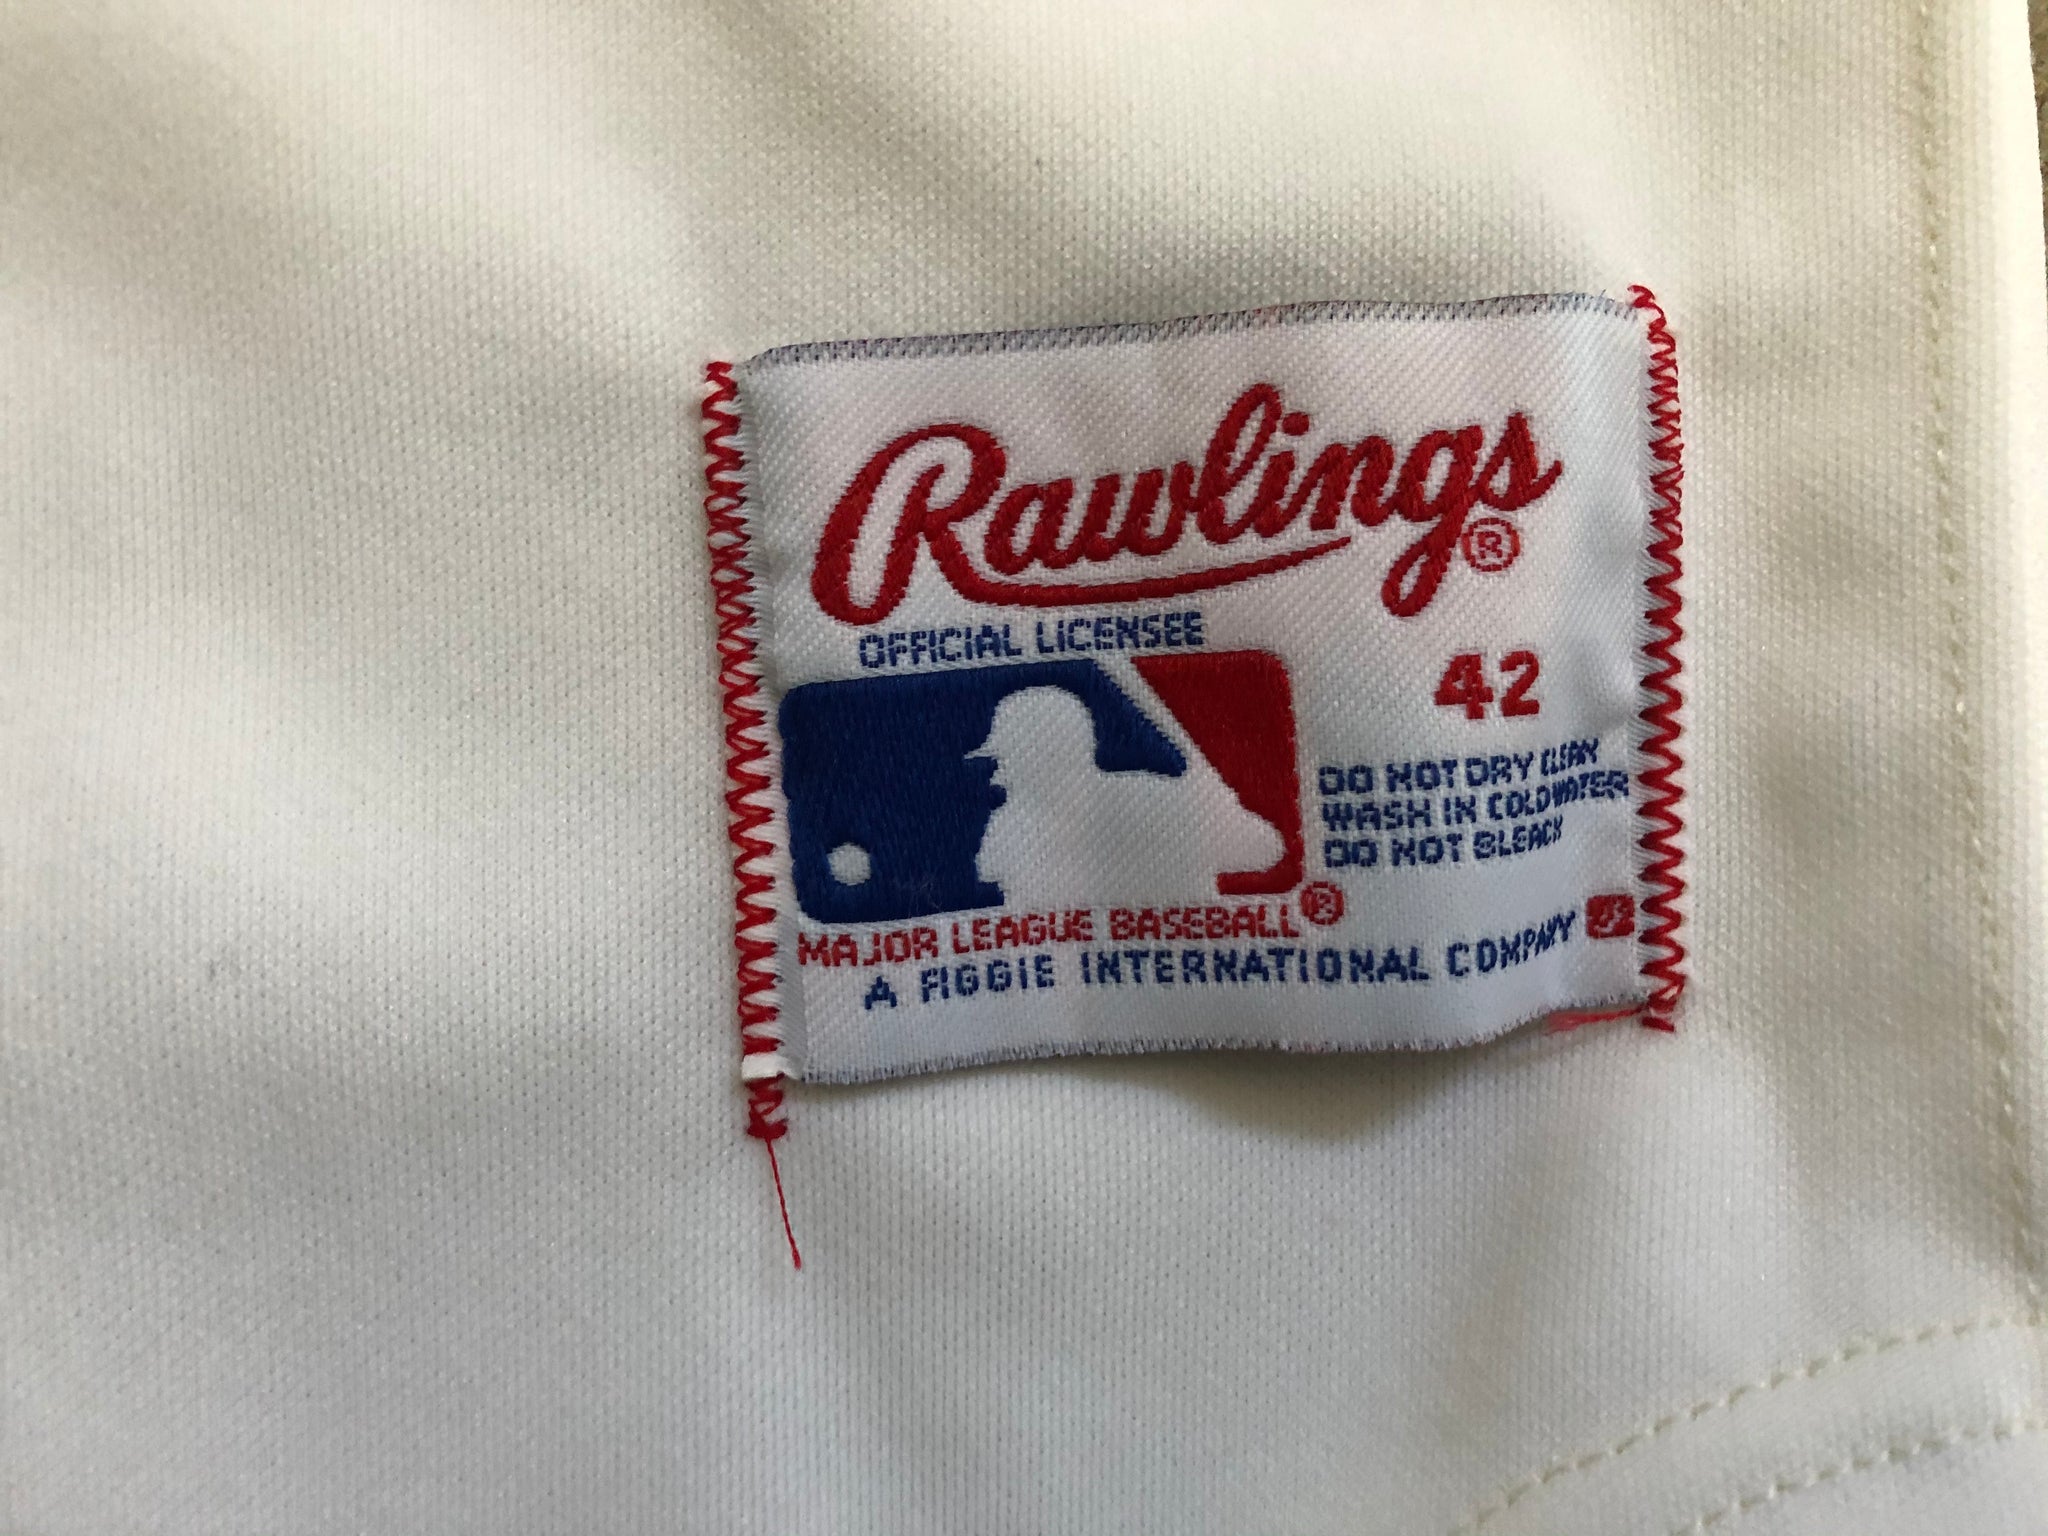 1990-91 OAKLAND ATHLETICS AUTHENTIC RAWLINGS JERSEY (AWAY) L